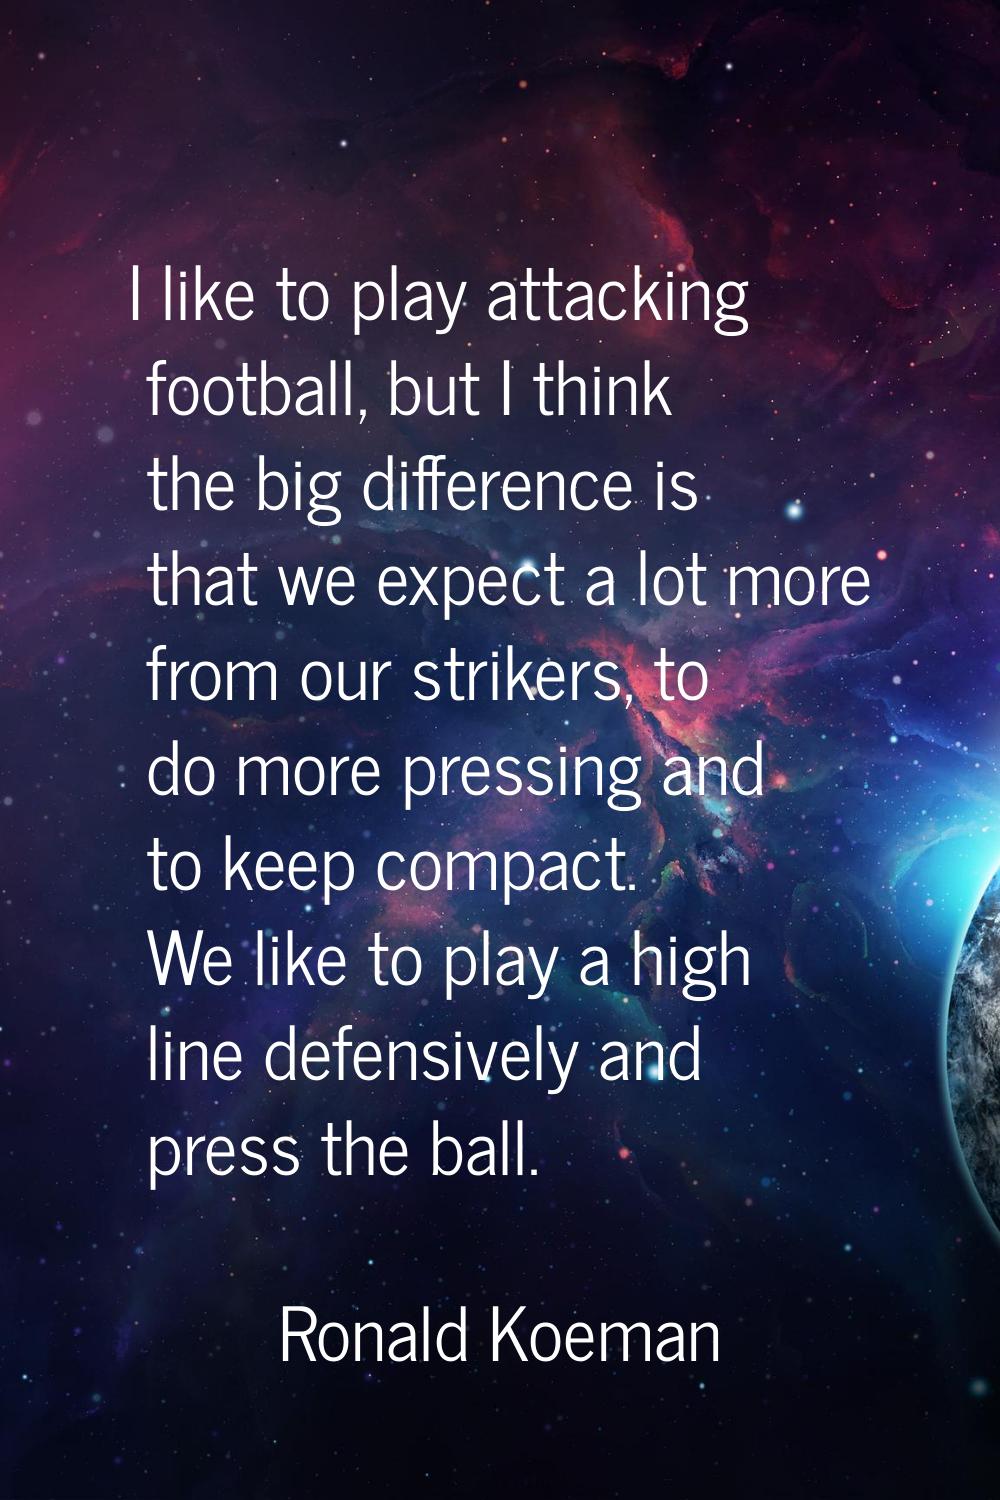 I like to play attacking football, but I think the big difference is that we expect a lot more from